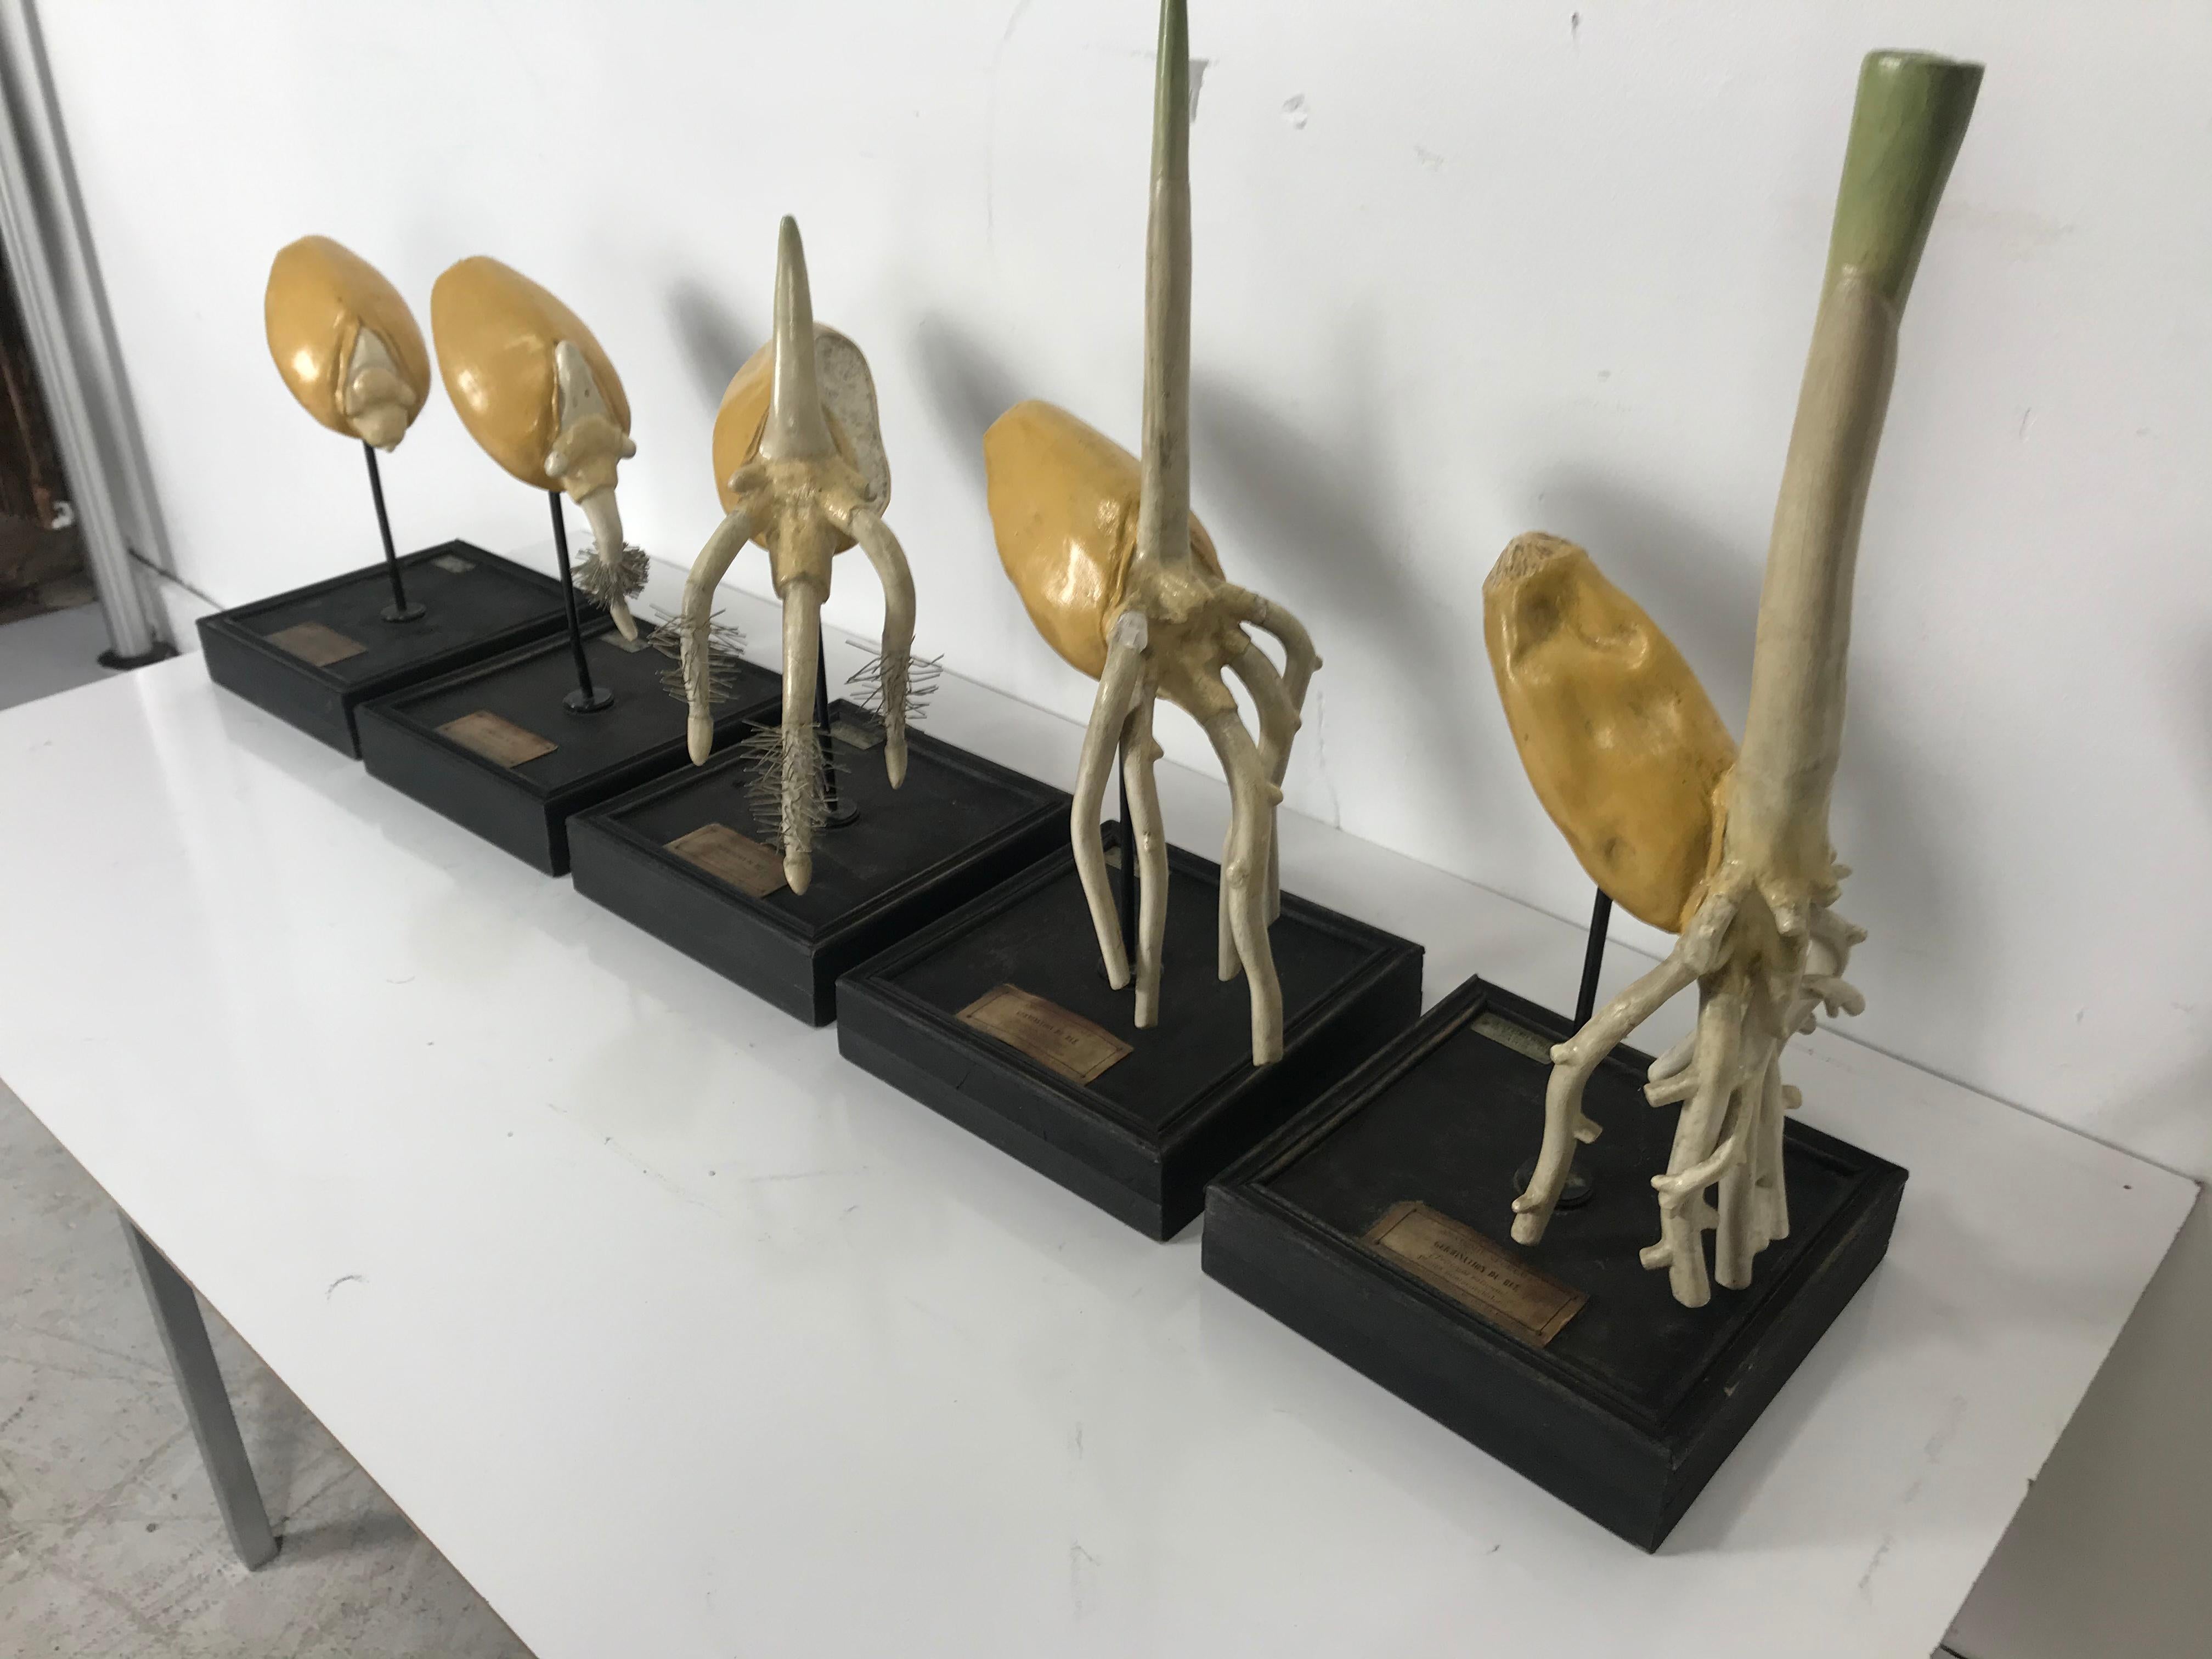 Les Fils D'Emile Deyrolle, Paris. Extremely rare set of five 19th century French painted plaster, wire and wood Didactic models depicting progression, Anatomie Vegetalf, beautifully executed, museum quality, all 5 retain they're original French